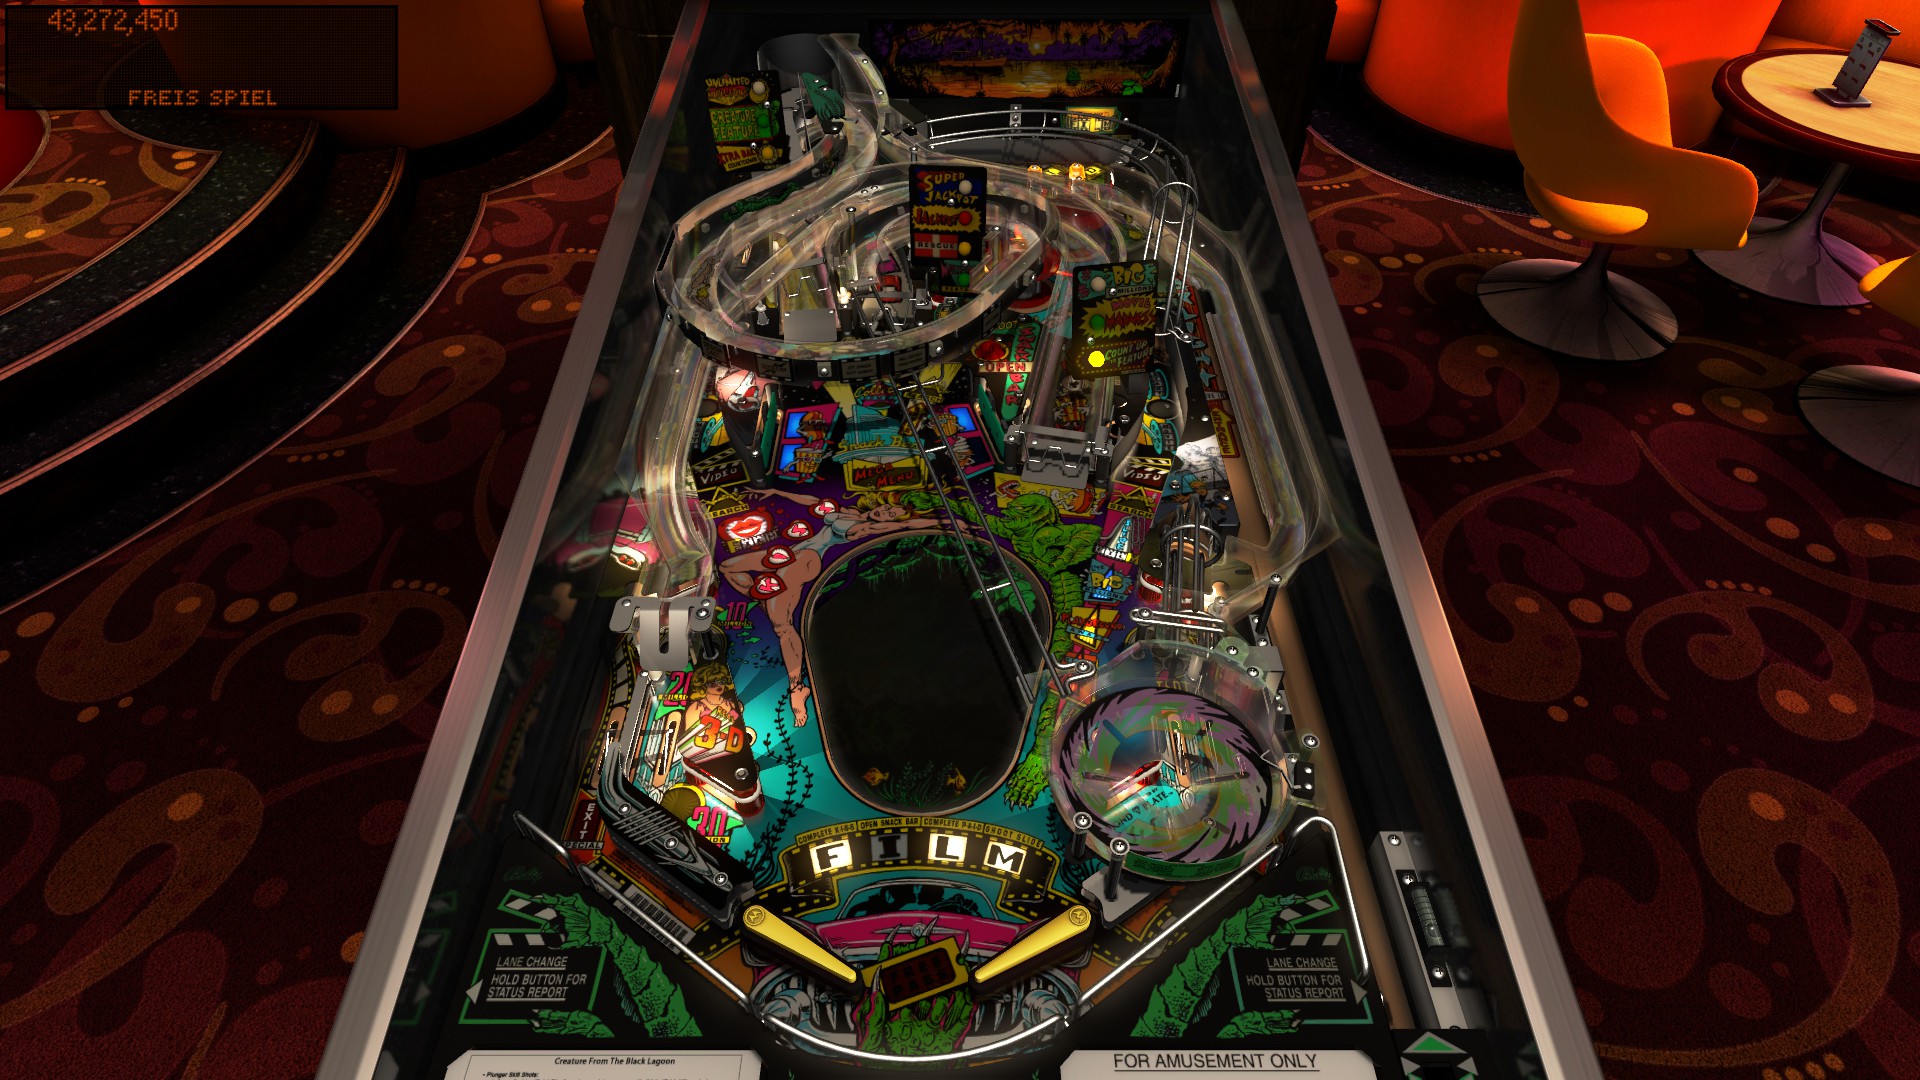 e2e4: Pinball FX3: The Creature From The Black Lagoon [Arcade] (PC) 43,272,450 points on 2022-05-19 20:11:02